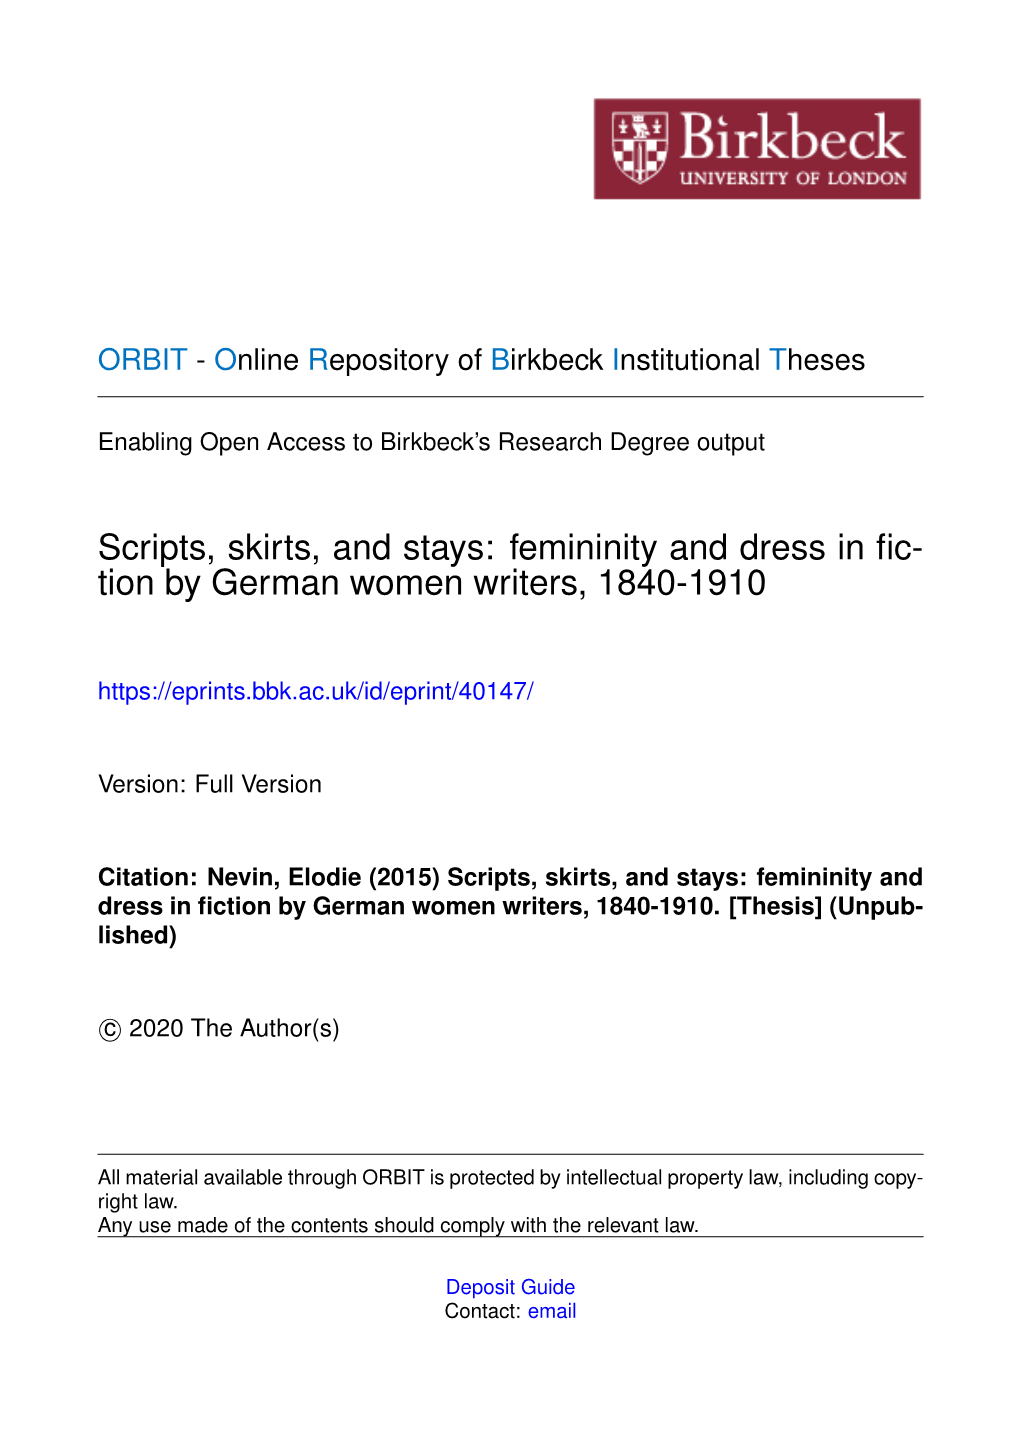 Femininity and Dress in ﬁc- Tion by German Women Writers, 1840-1910